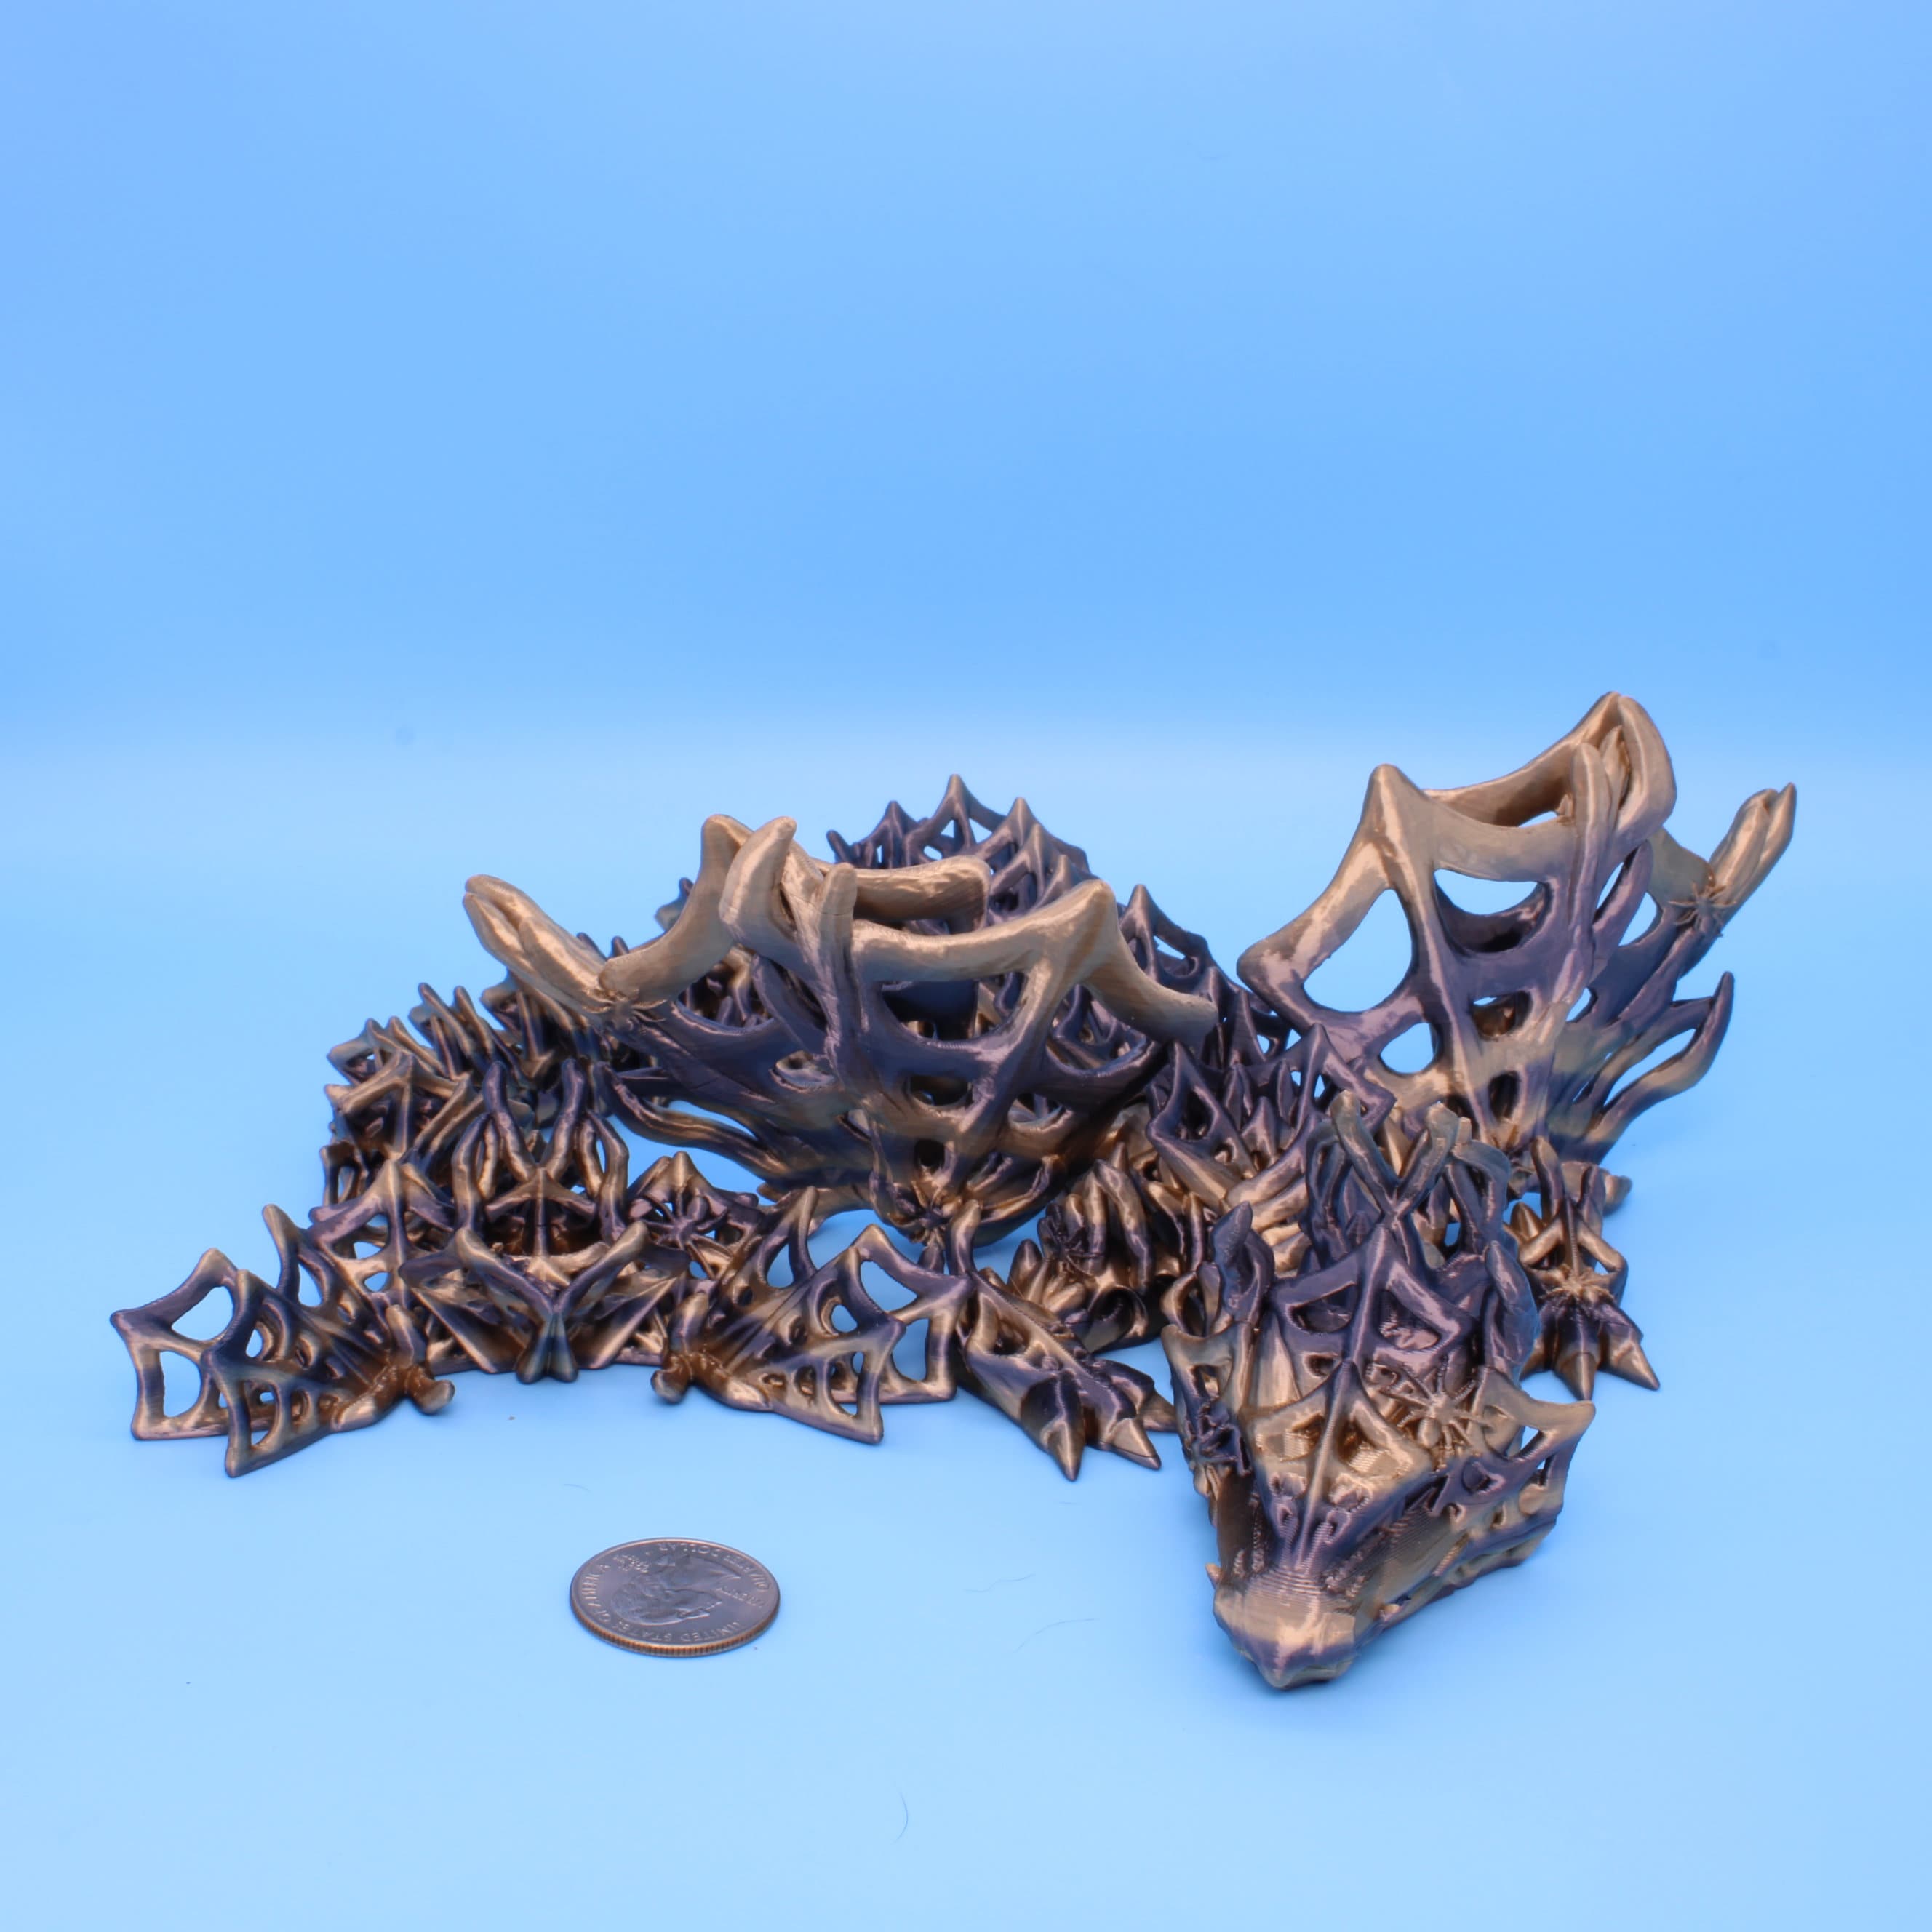 Wicked Wing Dragon | 3D printed | Articulating Dragon | 19.5 in.